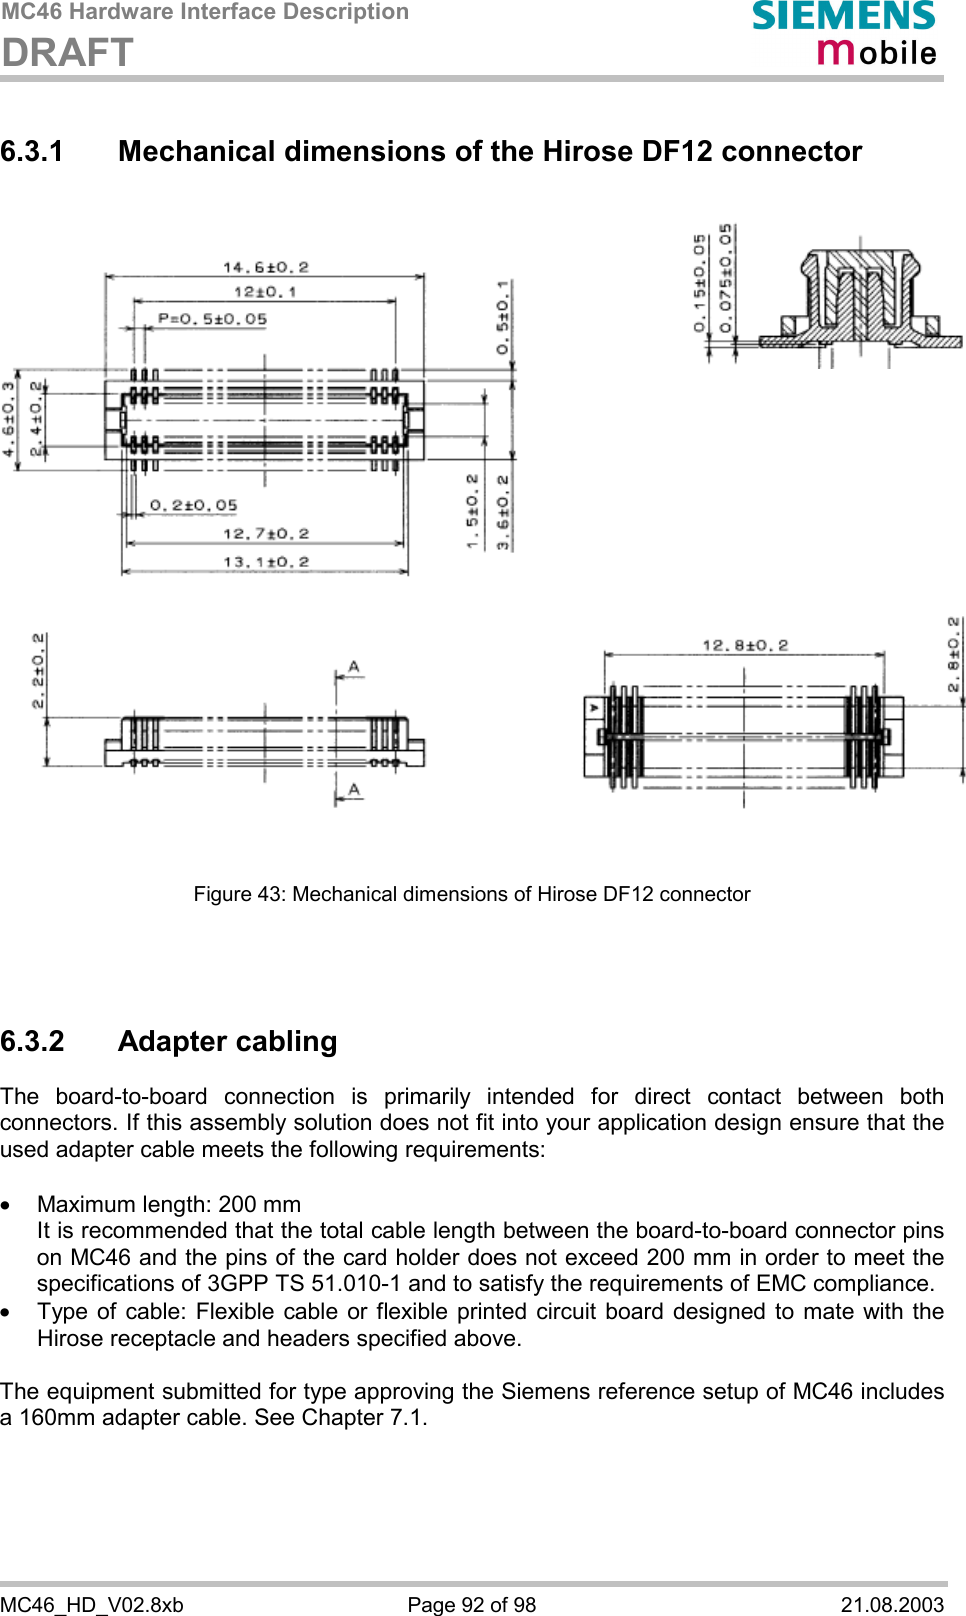 MC46 Hardware Interface Description DRAFT      MC46_HD_V02.8xb  Page 92 of 98  21.08.2003 6.3.1 Mechanical dimensions of the Hirose DF12 connector                 Figure 43: Mechanical dimensions of Hirose DF12 connector    6.3.2 Adapter cabling The board-to-board connection is primarily intended for direct contact between both connectors. If this assembly solution does not fit into your application design ensure that the used adapter cable meets the following requirements:  ·  Maximum length: 200 mm It is recommended that the total cable length between the board-to-board connector pins on MC46 and the pins of the card holder does not exceed 200 mm in order to meet the specifications of 3GPP TS 51.010-1 and to satisfy the requirements of EMC compliance. ·  Type of cable: Flexible cable or flexible printed circuit board designed to mate with the Hirose receptacle and headers specified above.   The equipment submitted for type approving the Siemens reference setup of MC46 includes a 160mm adapter cable. See Chapter 7.1.  